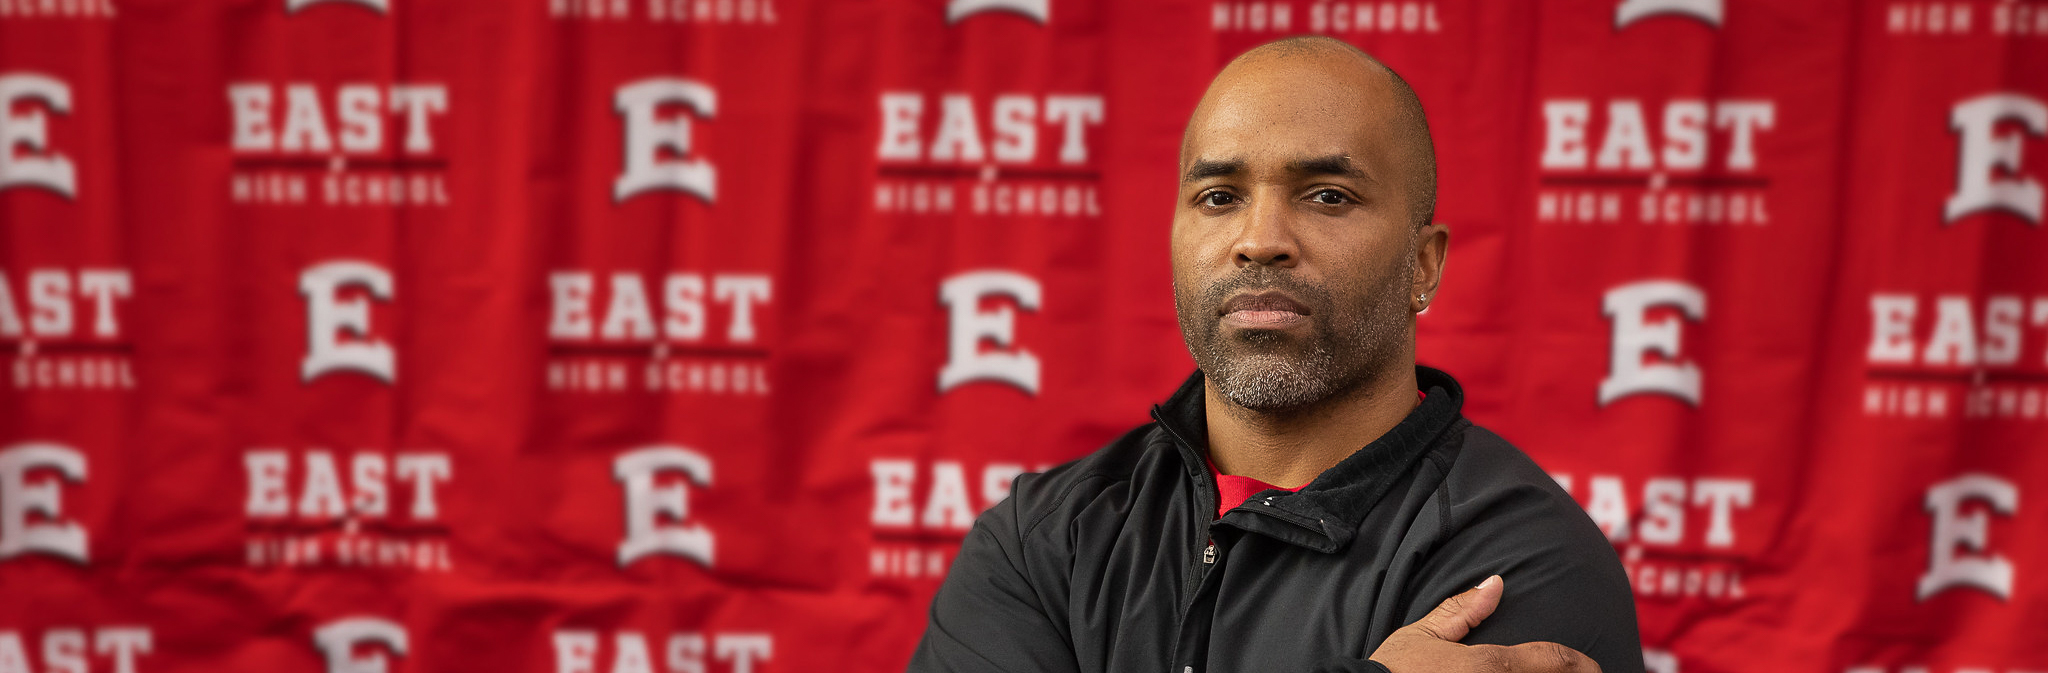 A Cross-Town Homecoming for East’s New Football Coach